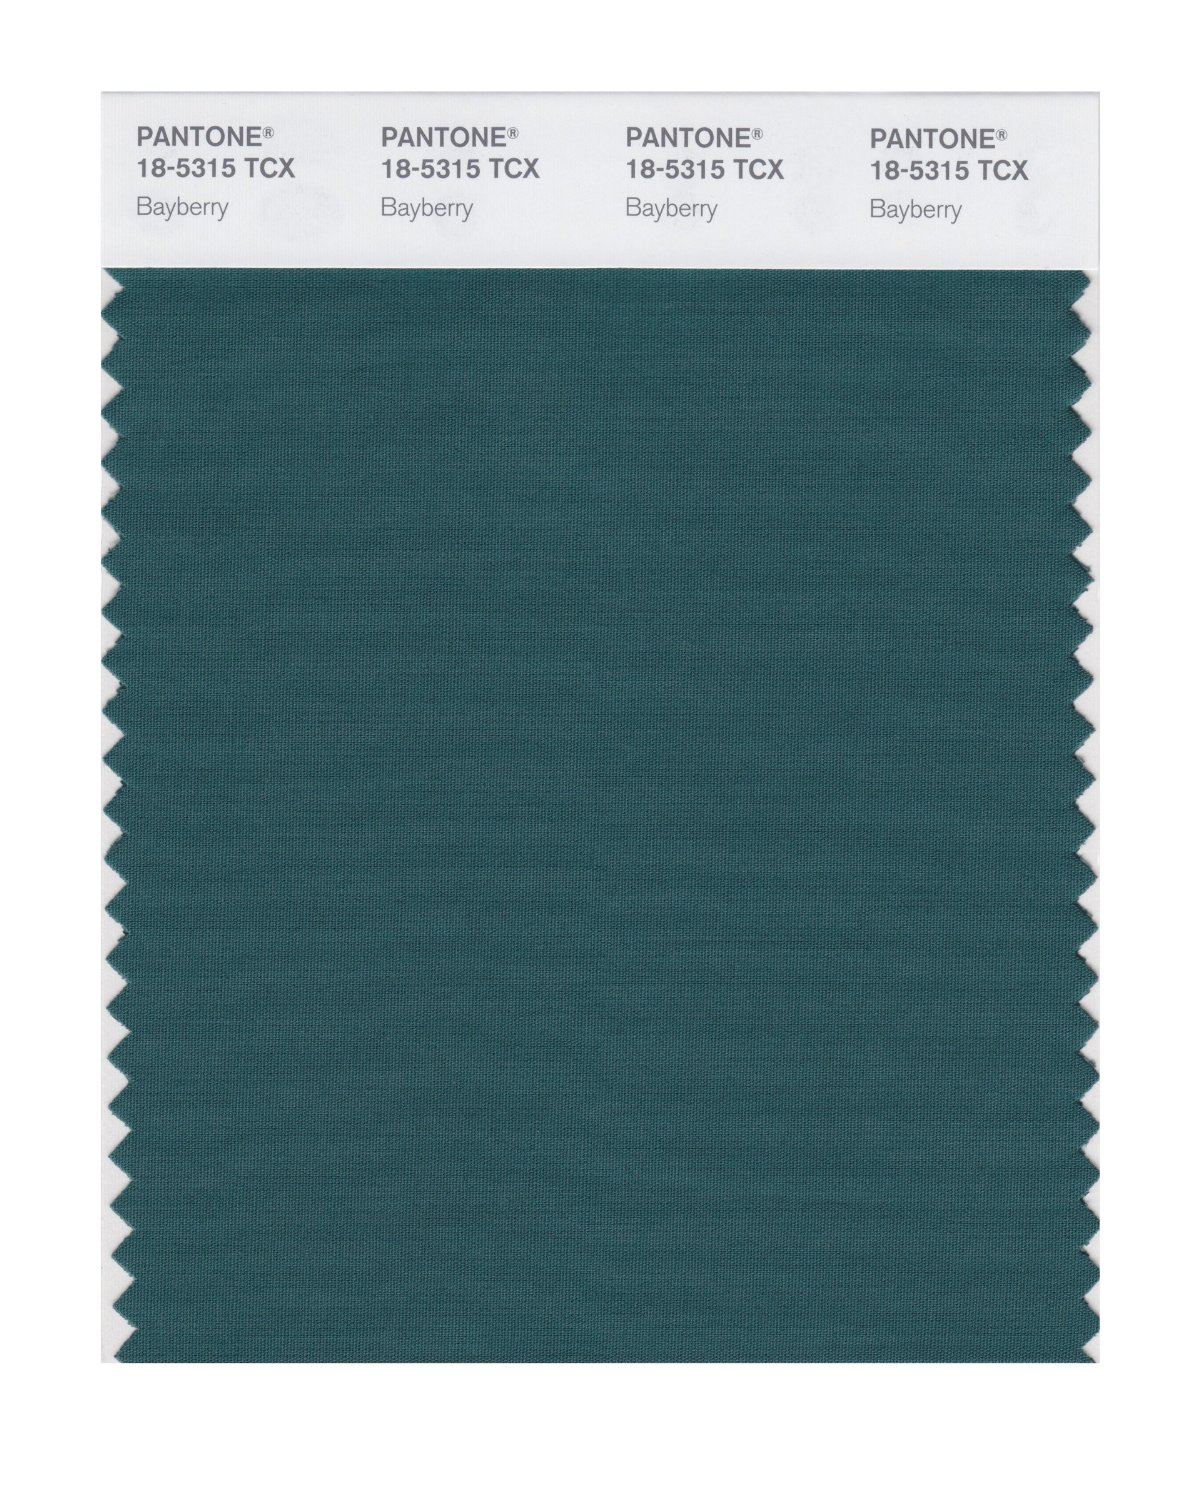 Pantone Cotton Swatch 18-5315 Bayberry